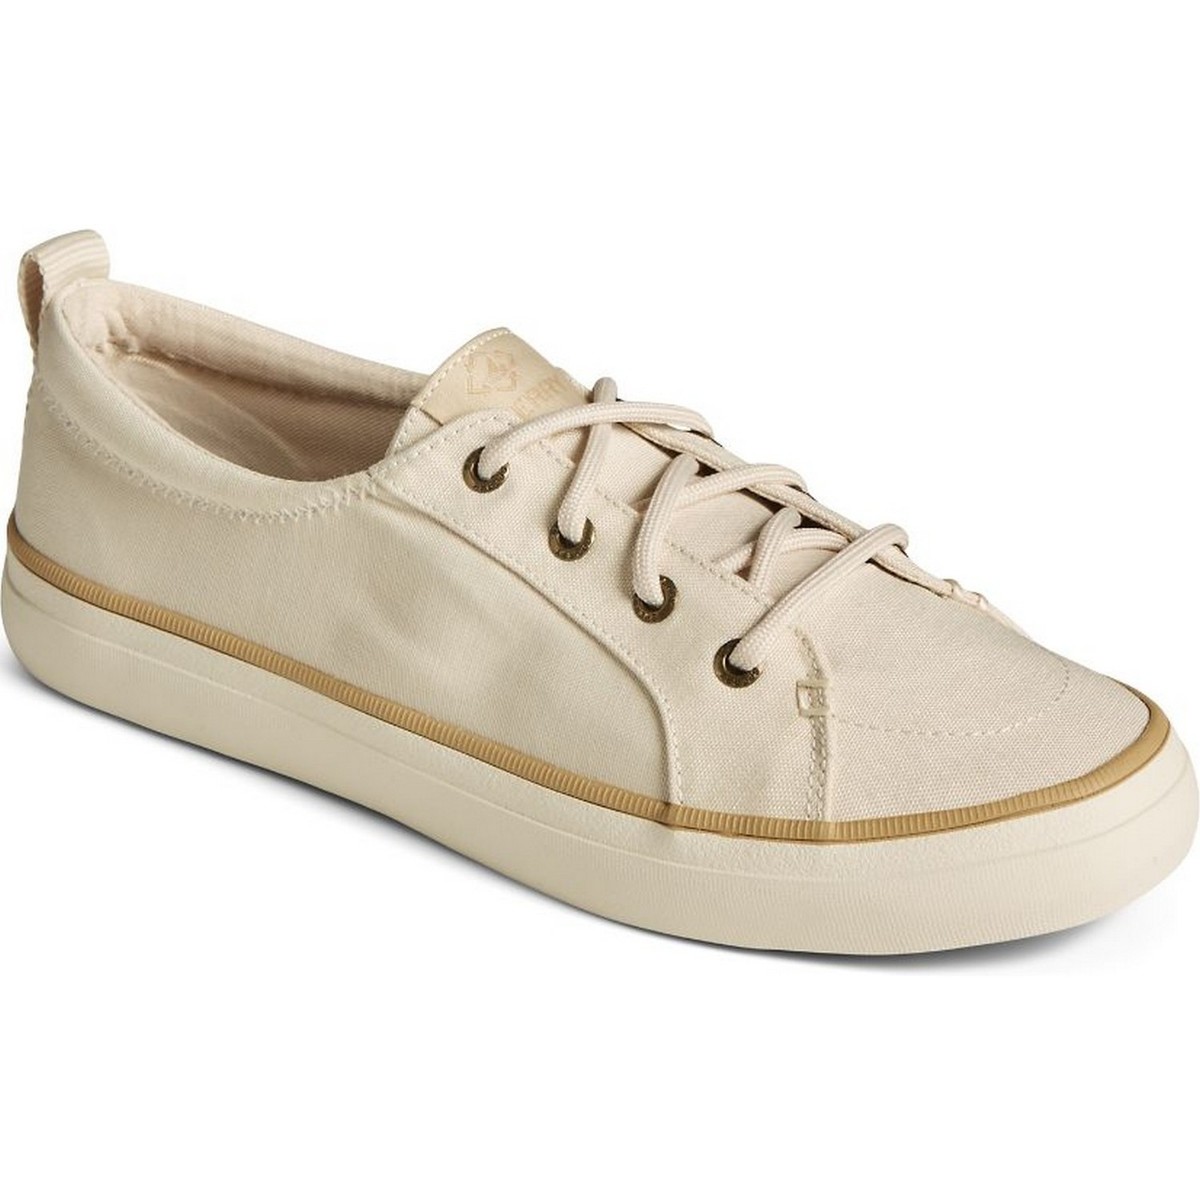 Scarpe Donna Sneakers Sperry Top-Sider Crest Vibe Bianco